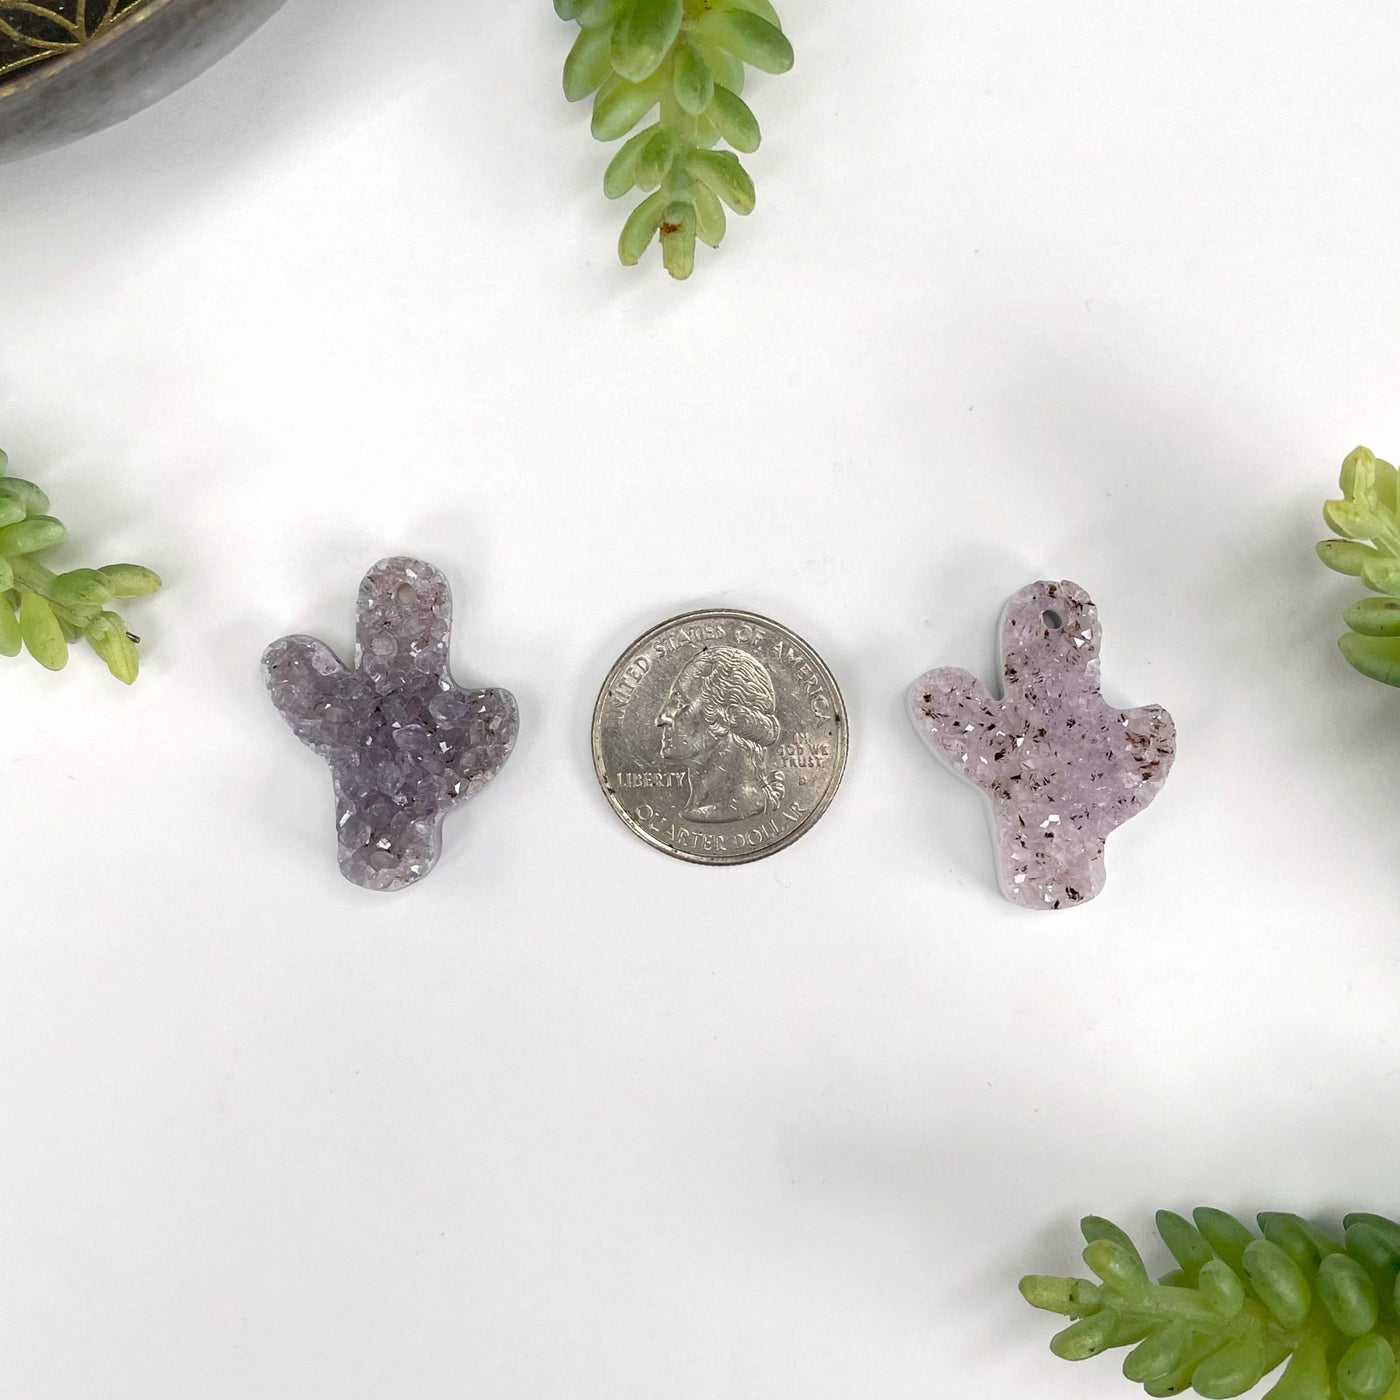 amethyst druzy drilled cactuses with quarter for size reference